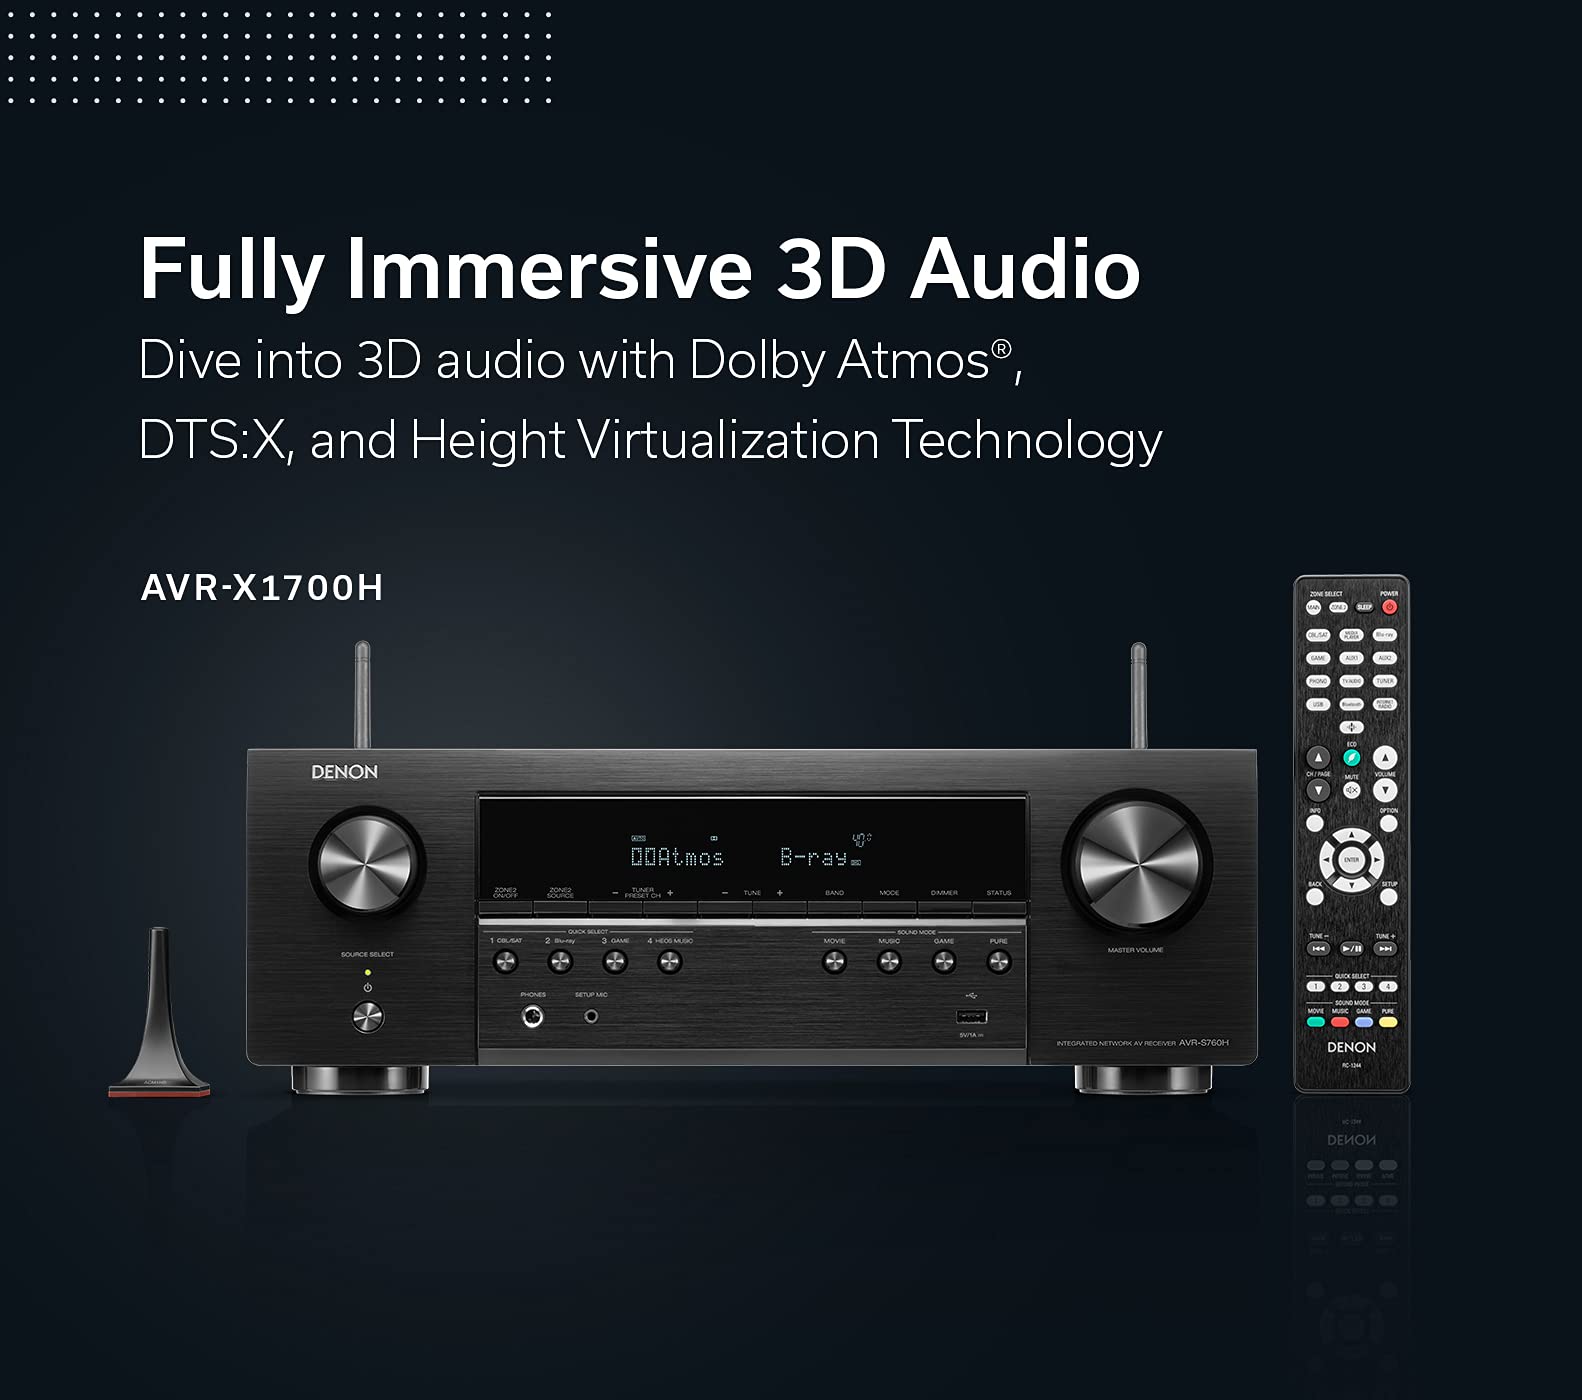 How To Setup Denon AVR 1513 Remote: The Essential Guide For 2023